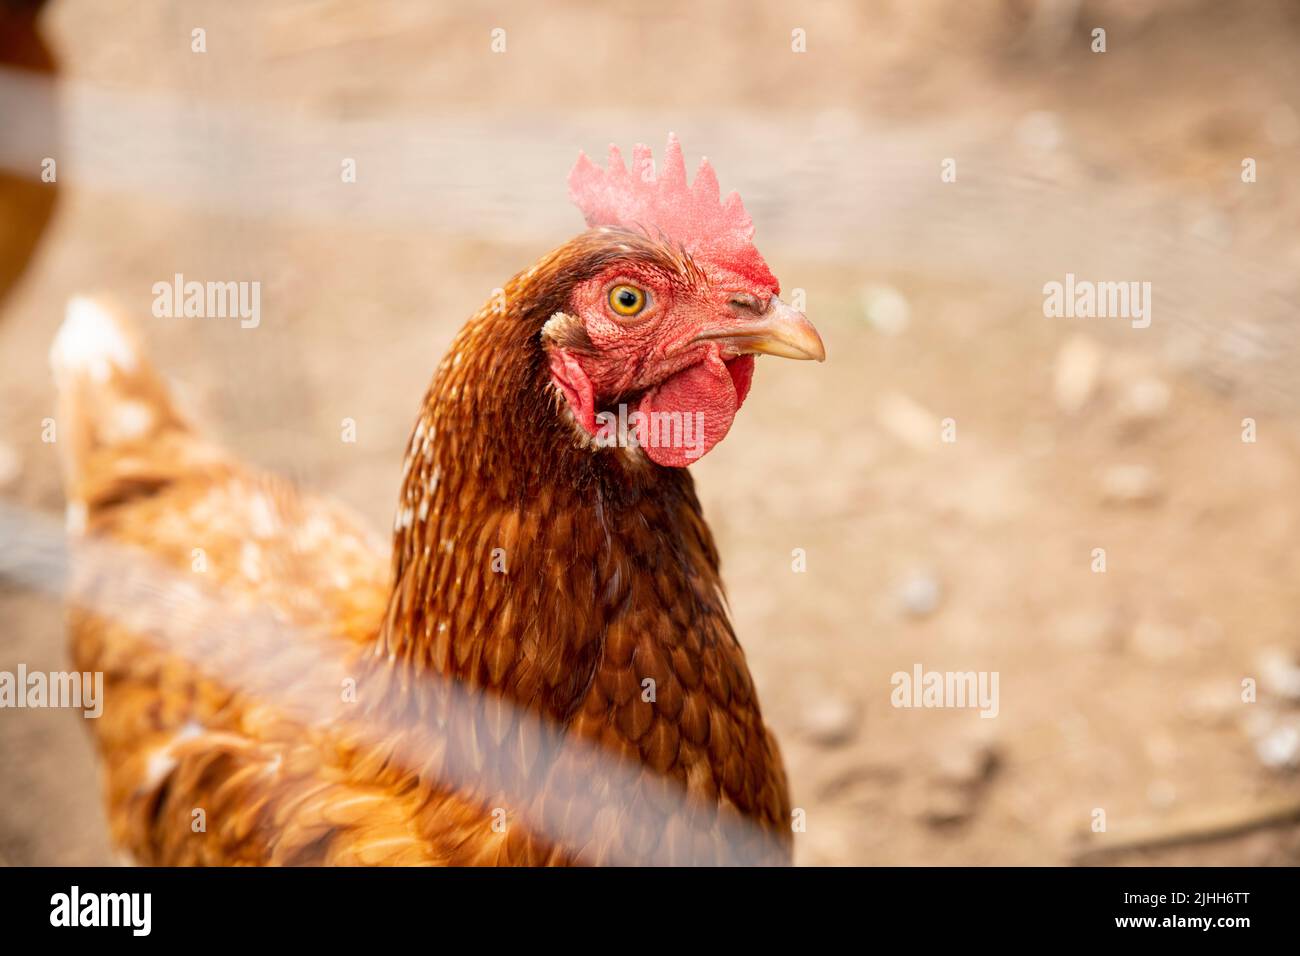 Beautiful Chicken on a Farm Through a Fence. Closeup with Gorgeous Eyes. Stock Photo